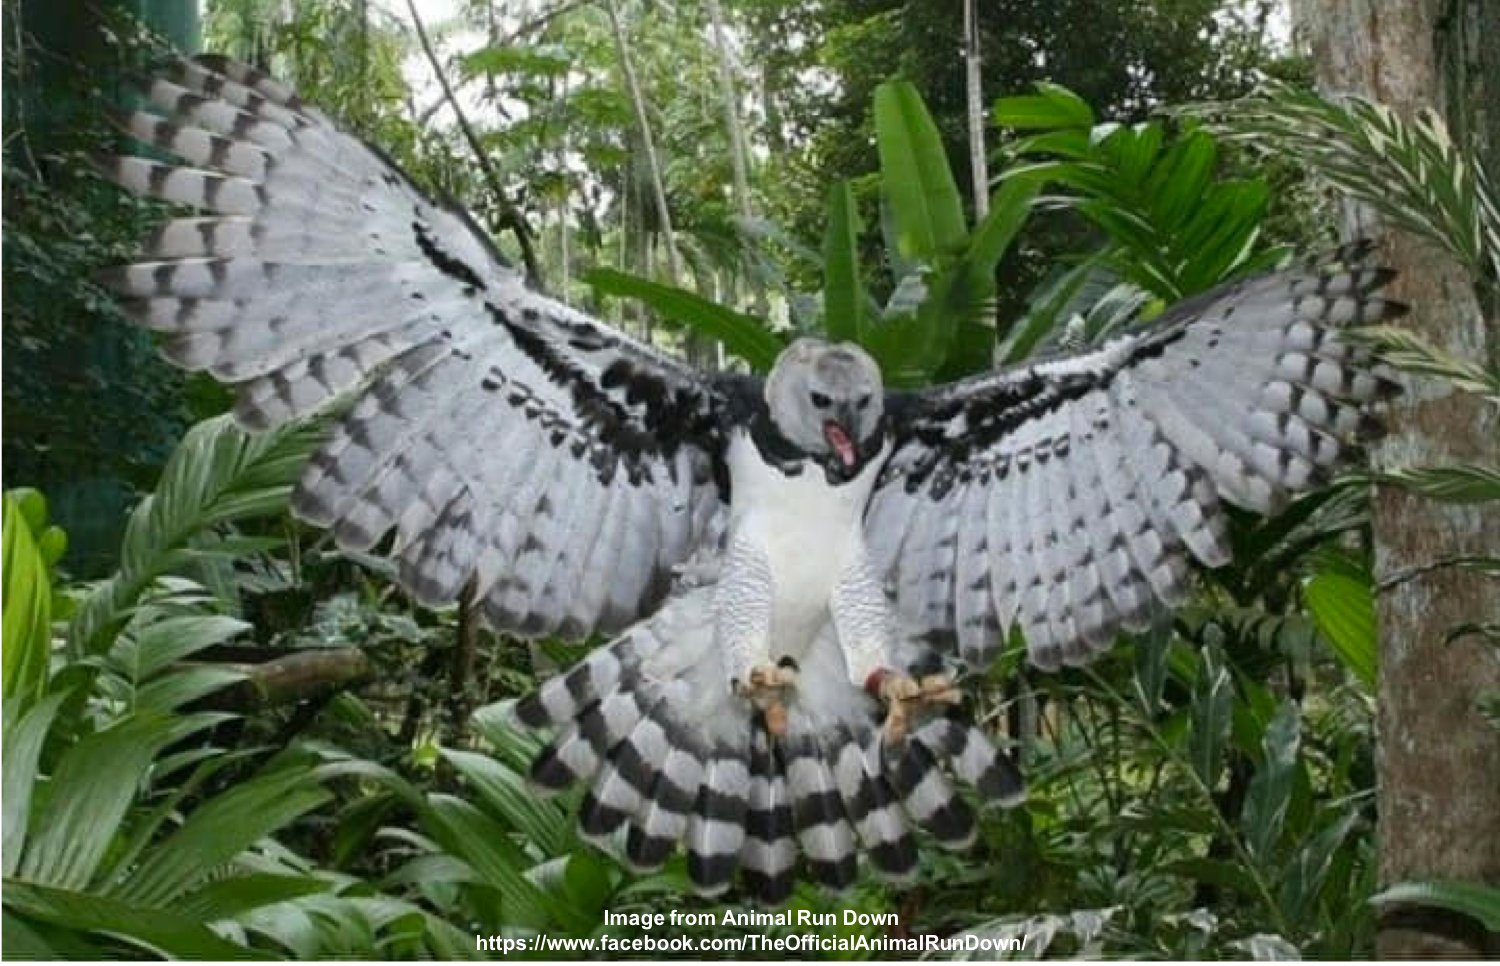 Mauna Dasari on X: Harpy Eagle PIVOTS IN THE AIR by using her rudder like  tail to avoid his attack and slashes at his back with her  grizzly-bear-esque TALONS! #2021MMM  /